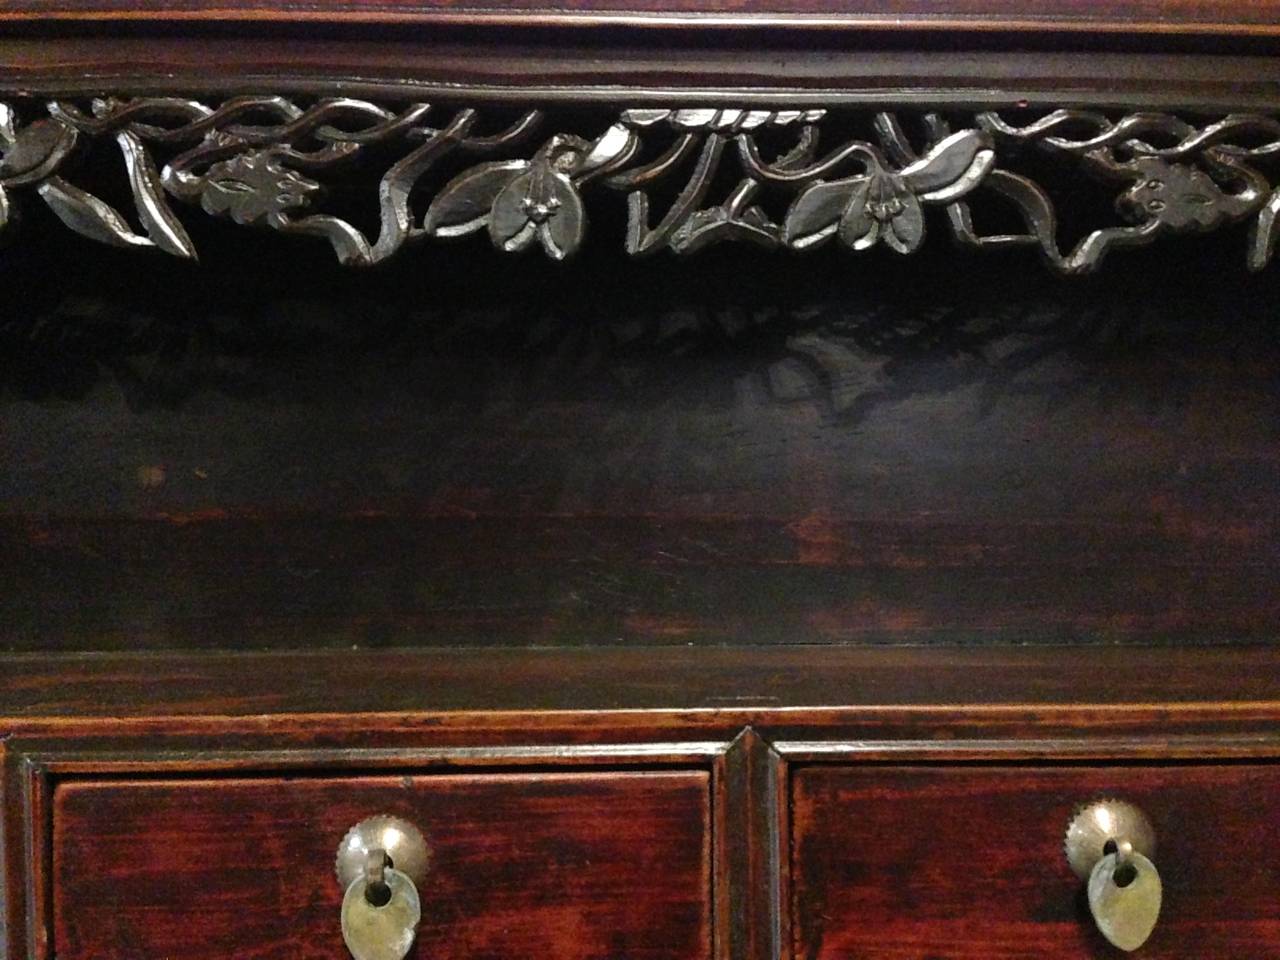 Beautiful, delicately carved open light altar with 4 exquisite little drawers. The carvings appear to be lotuses and bats, which are symbols of purity and good fortune. Solid wood. Tenons and mortises.